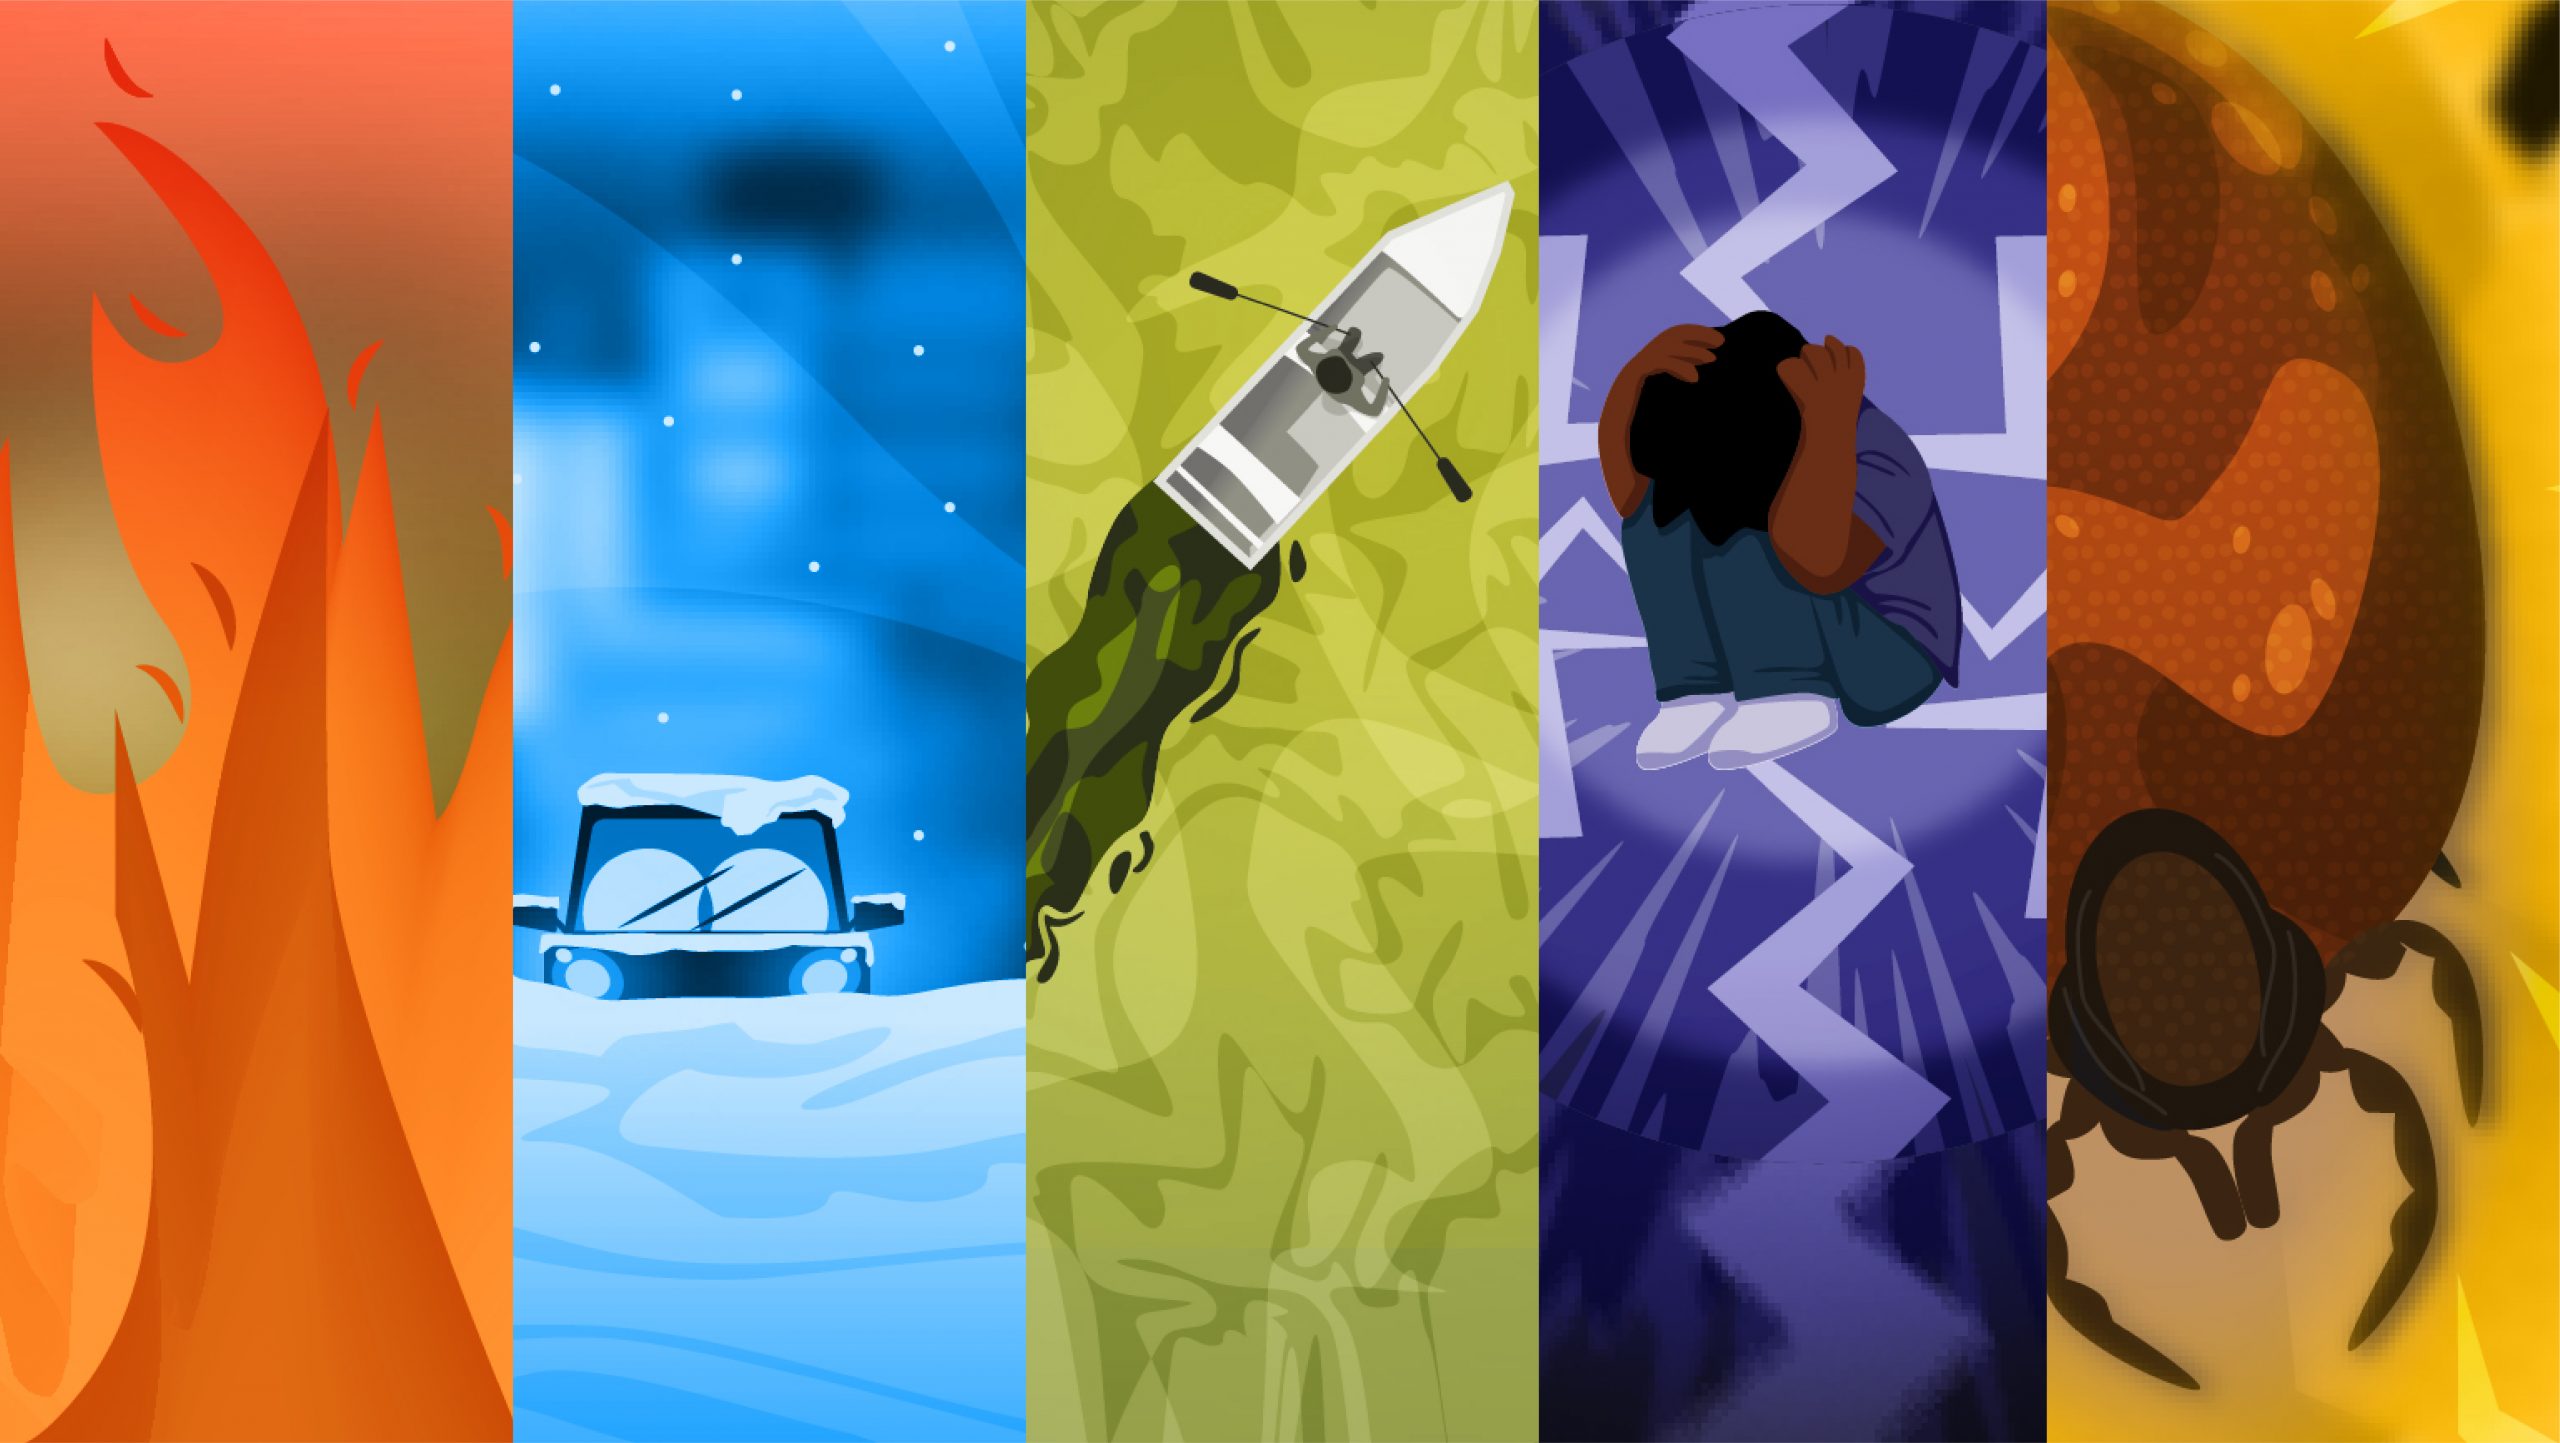 5 Event Cards from the game Strange Weather We're Having. From Left to Right: Wildfire, Snow Squall, Toxic Algal Bloom, Anxiety Attack, and Lyme Disease